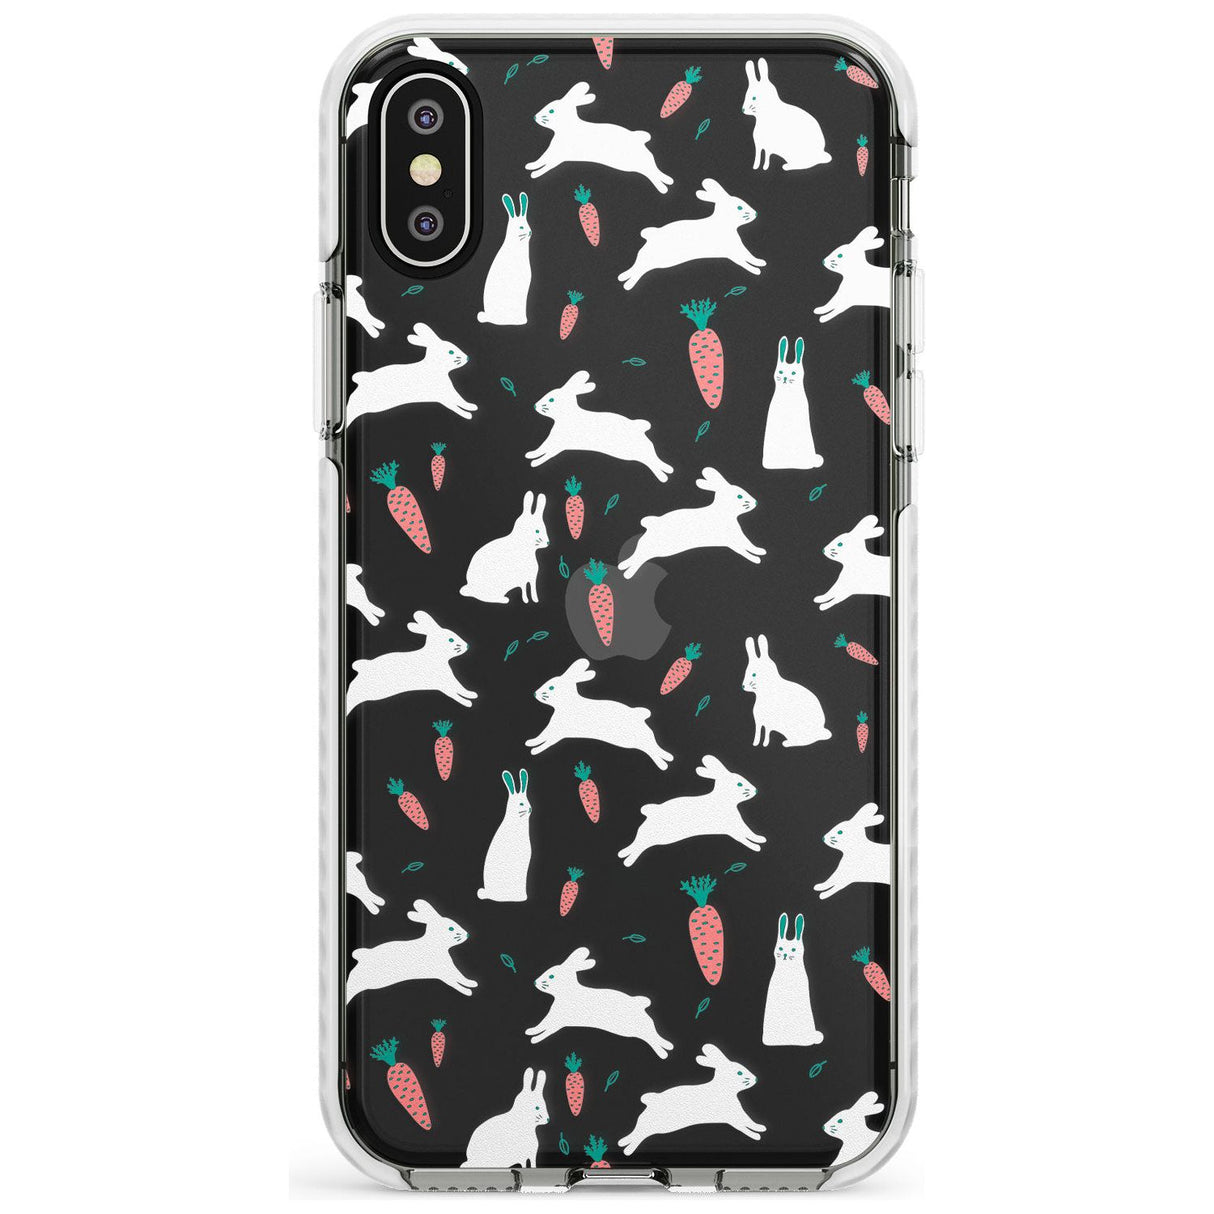 White Bunnies and Carrots Impact Phone Case for iPhone X XS Max XR